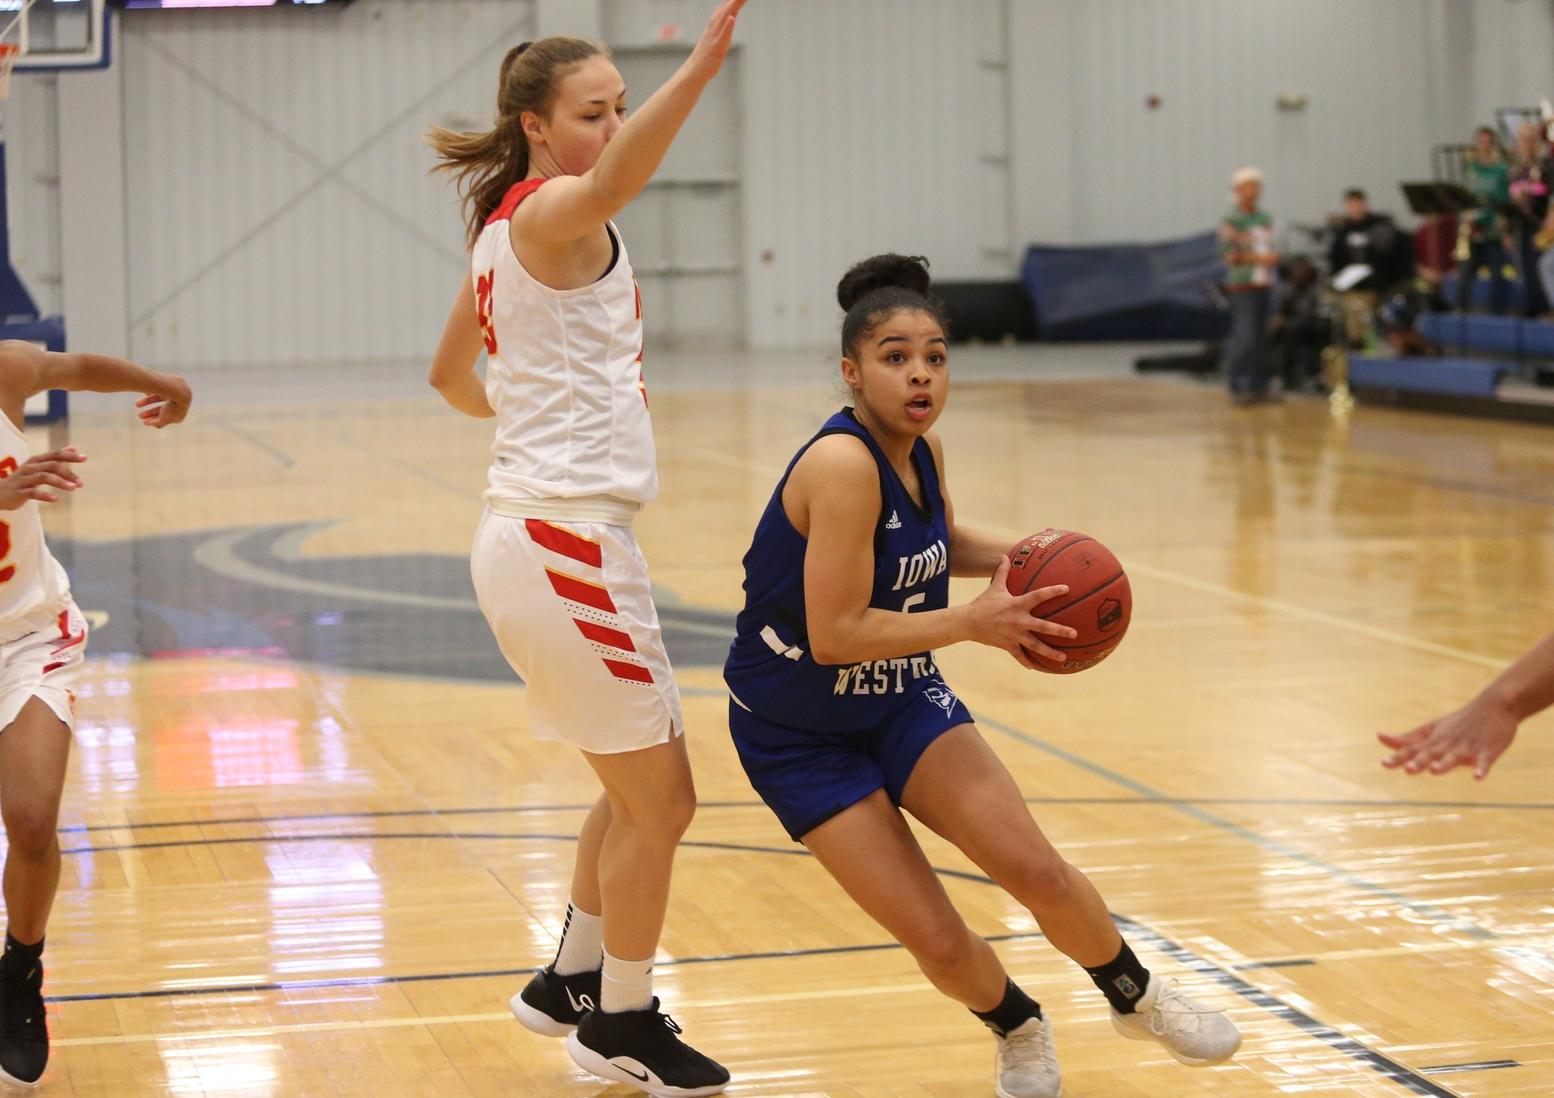 Reivers roll through road trip, Sophomore Night on tap